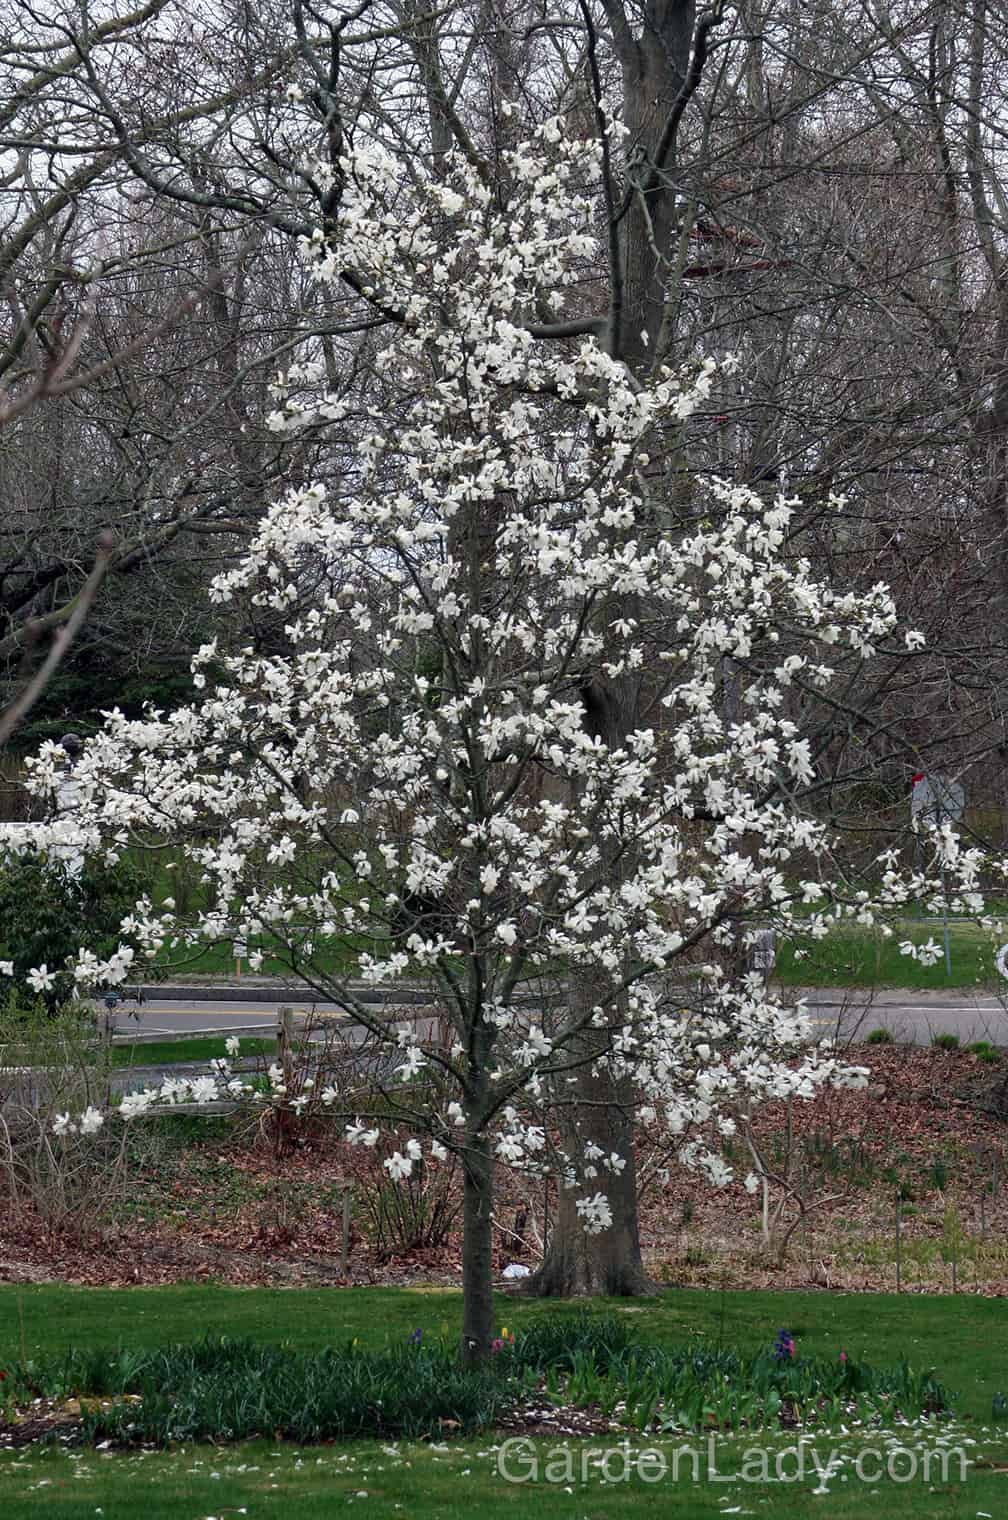 Star magnolias maintain a nicely shaped crown all on their own...no major pruning required other than the removal of dead wood and crossed  (rubbing) branches.